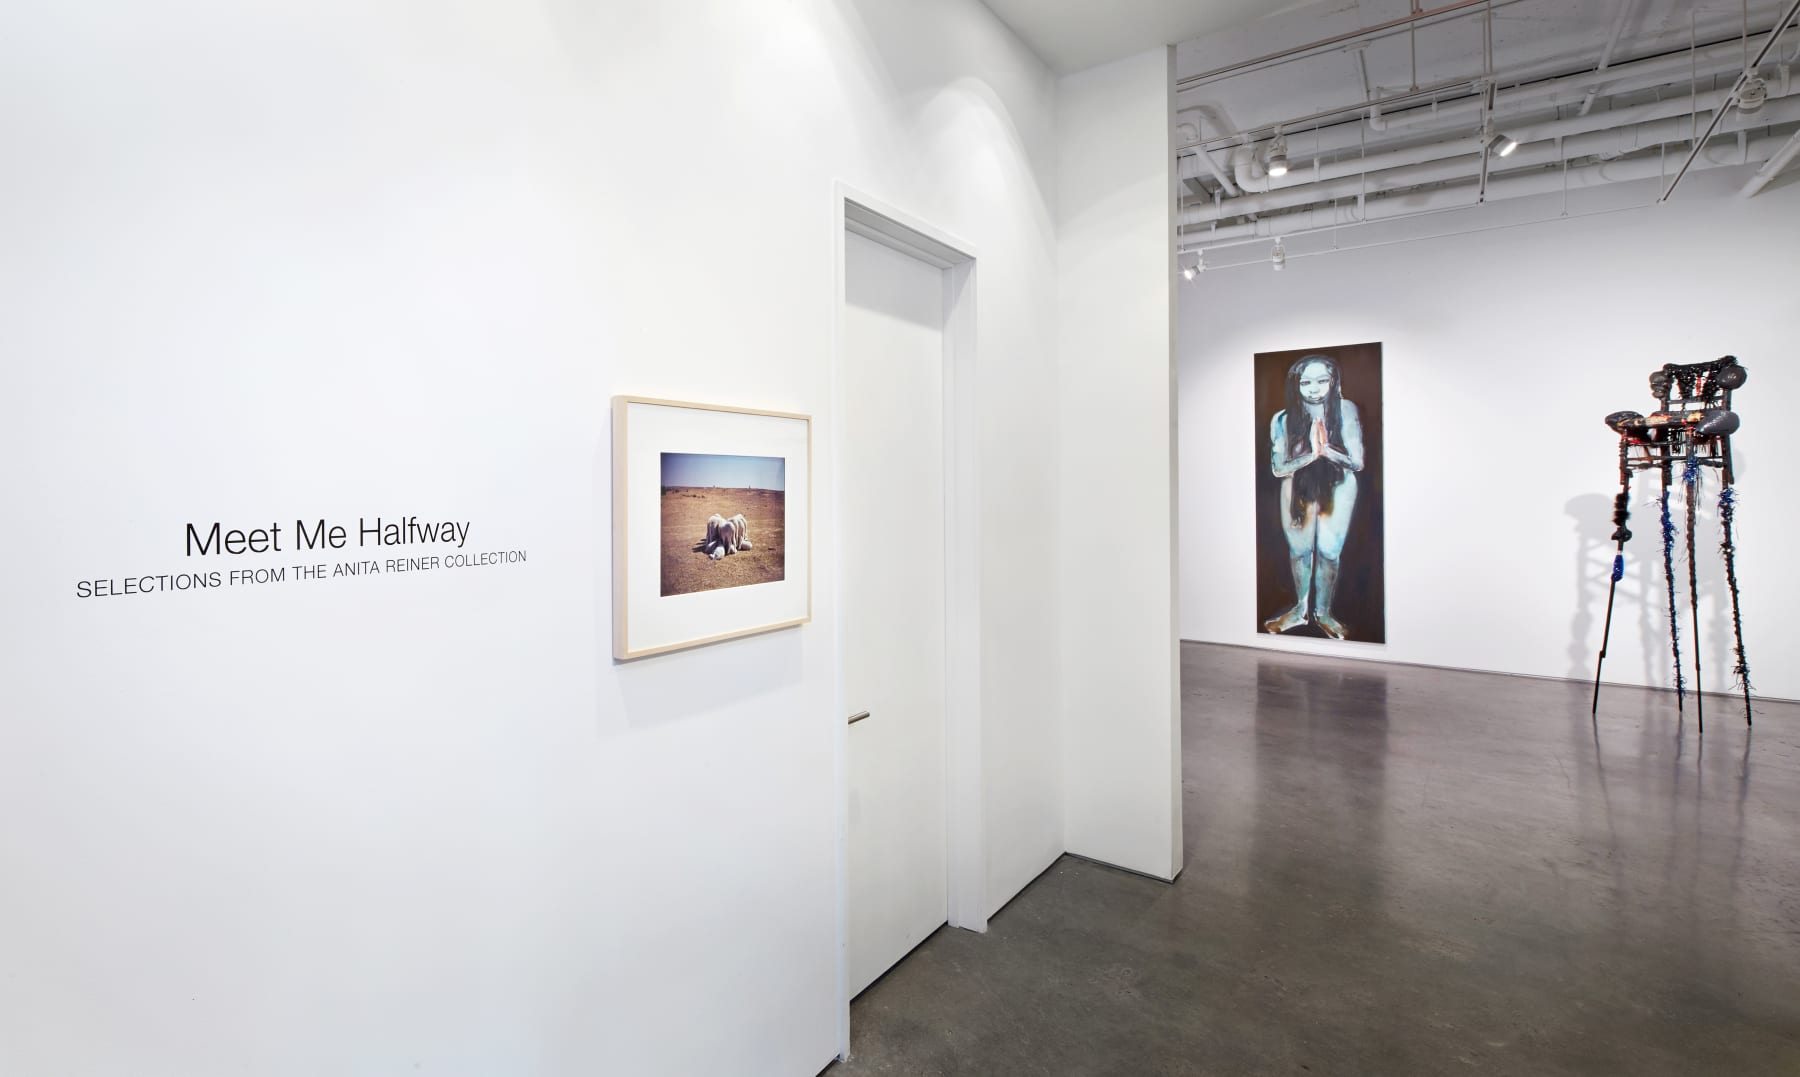 Meet Me Halfway: Selections from the Anita Reiner Collection